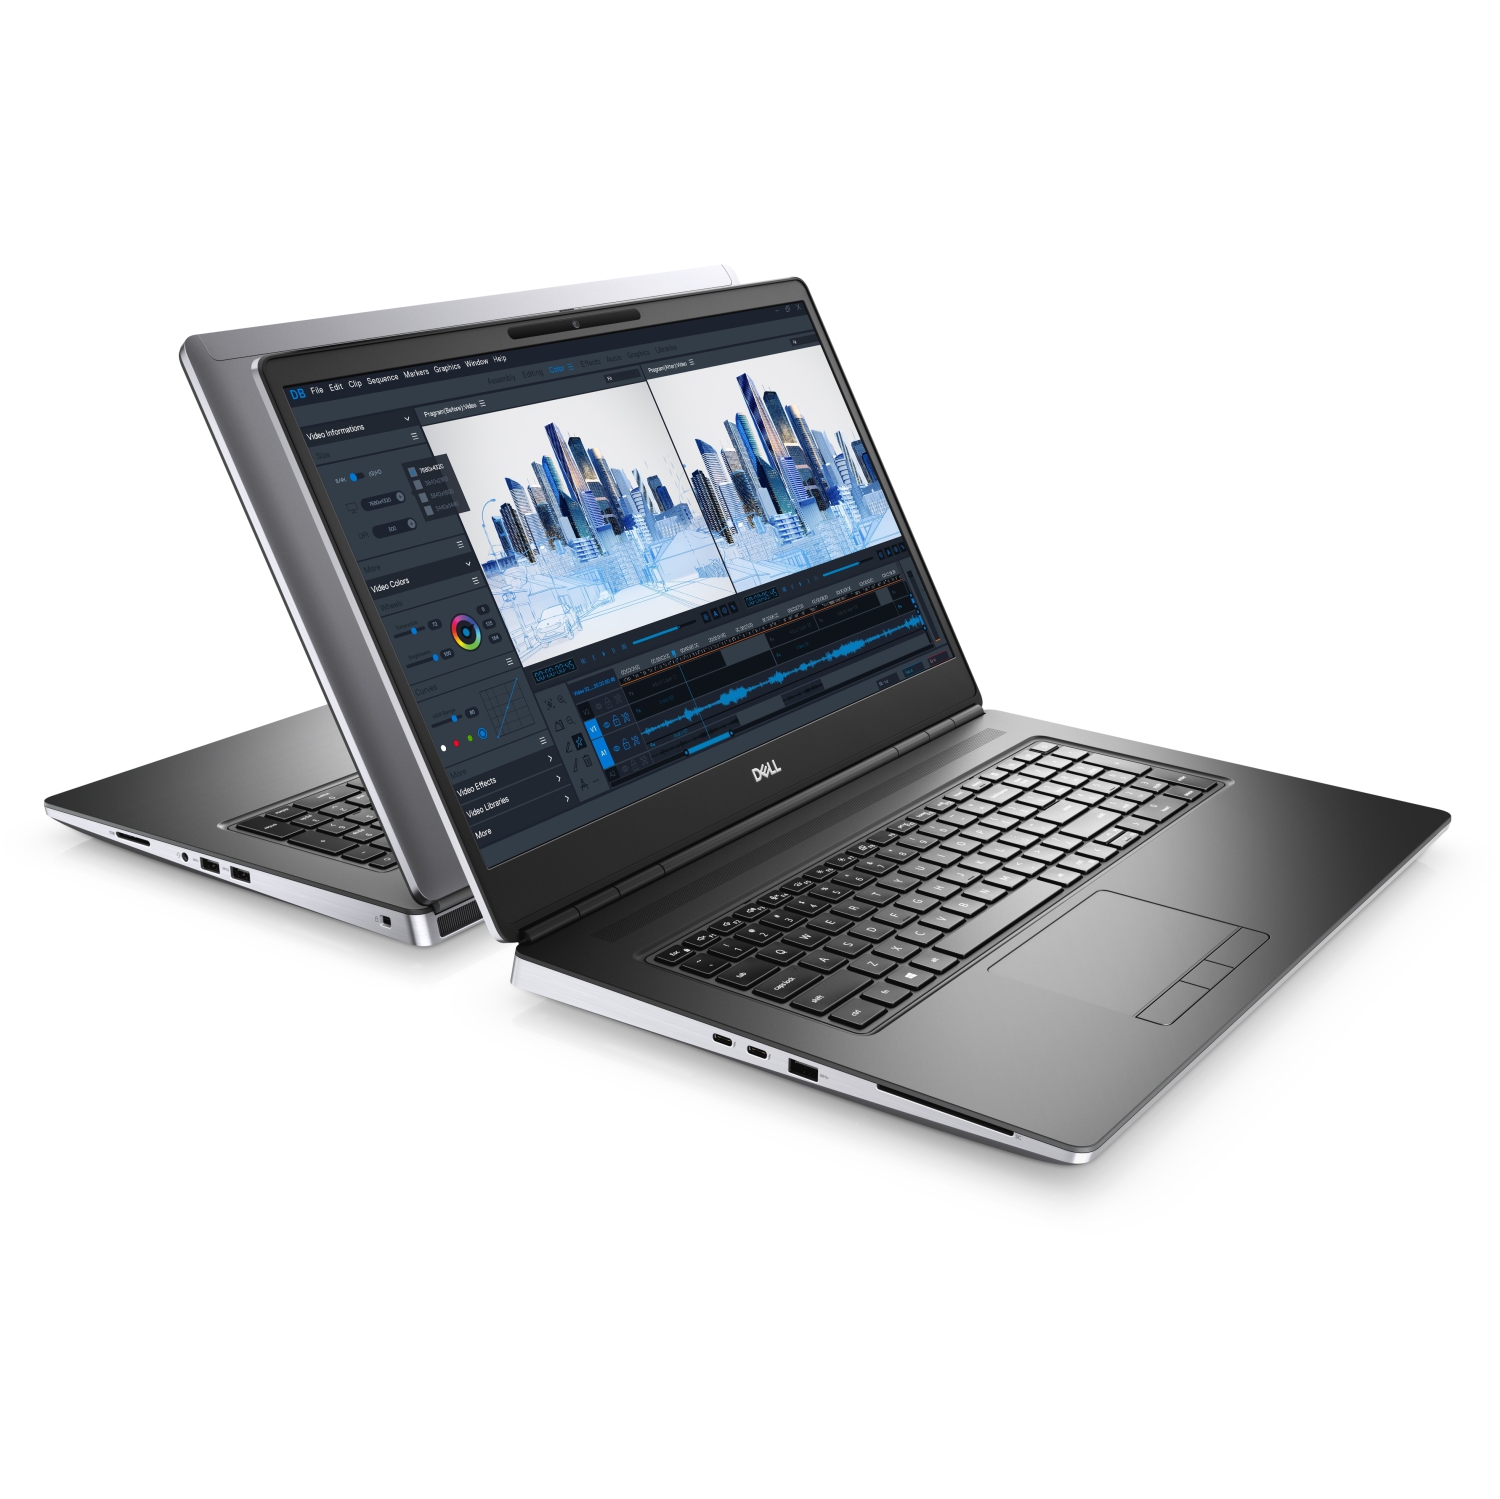 Refurbished (Excellent) - Dell Precision 7000 7760 Workstation Laptop (2021), 17.3" FHD, Core i7, 512GB SSD, 32GB RAM, RTX A4000, 4.6 GHz, 11th Gen CPU Certified